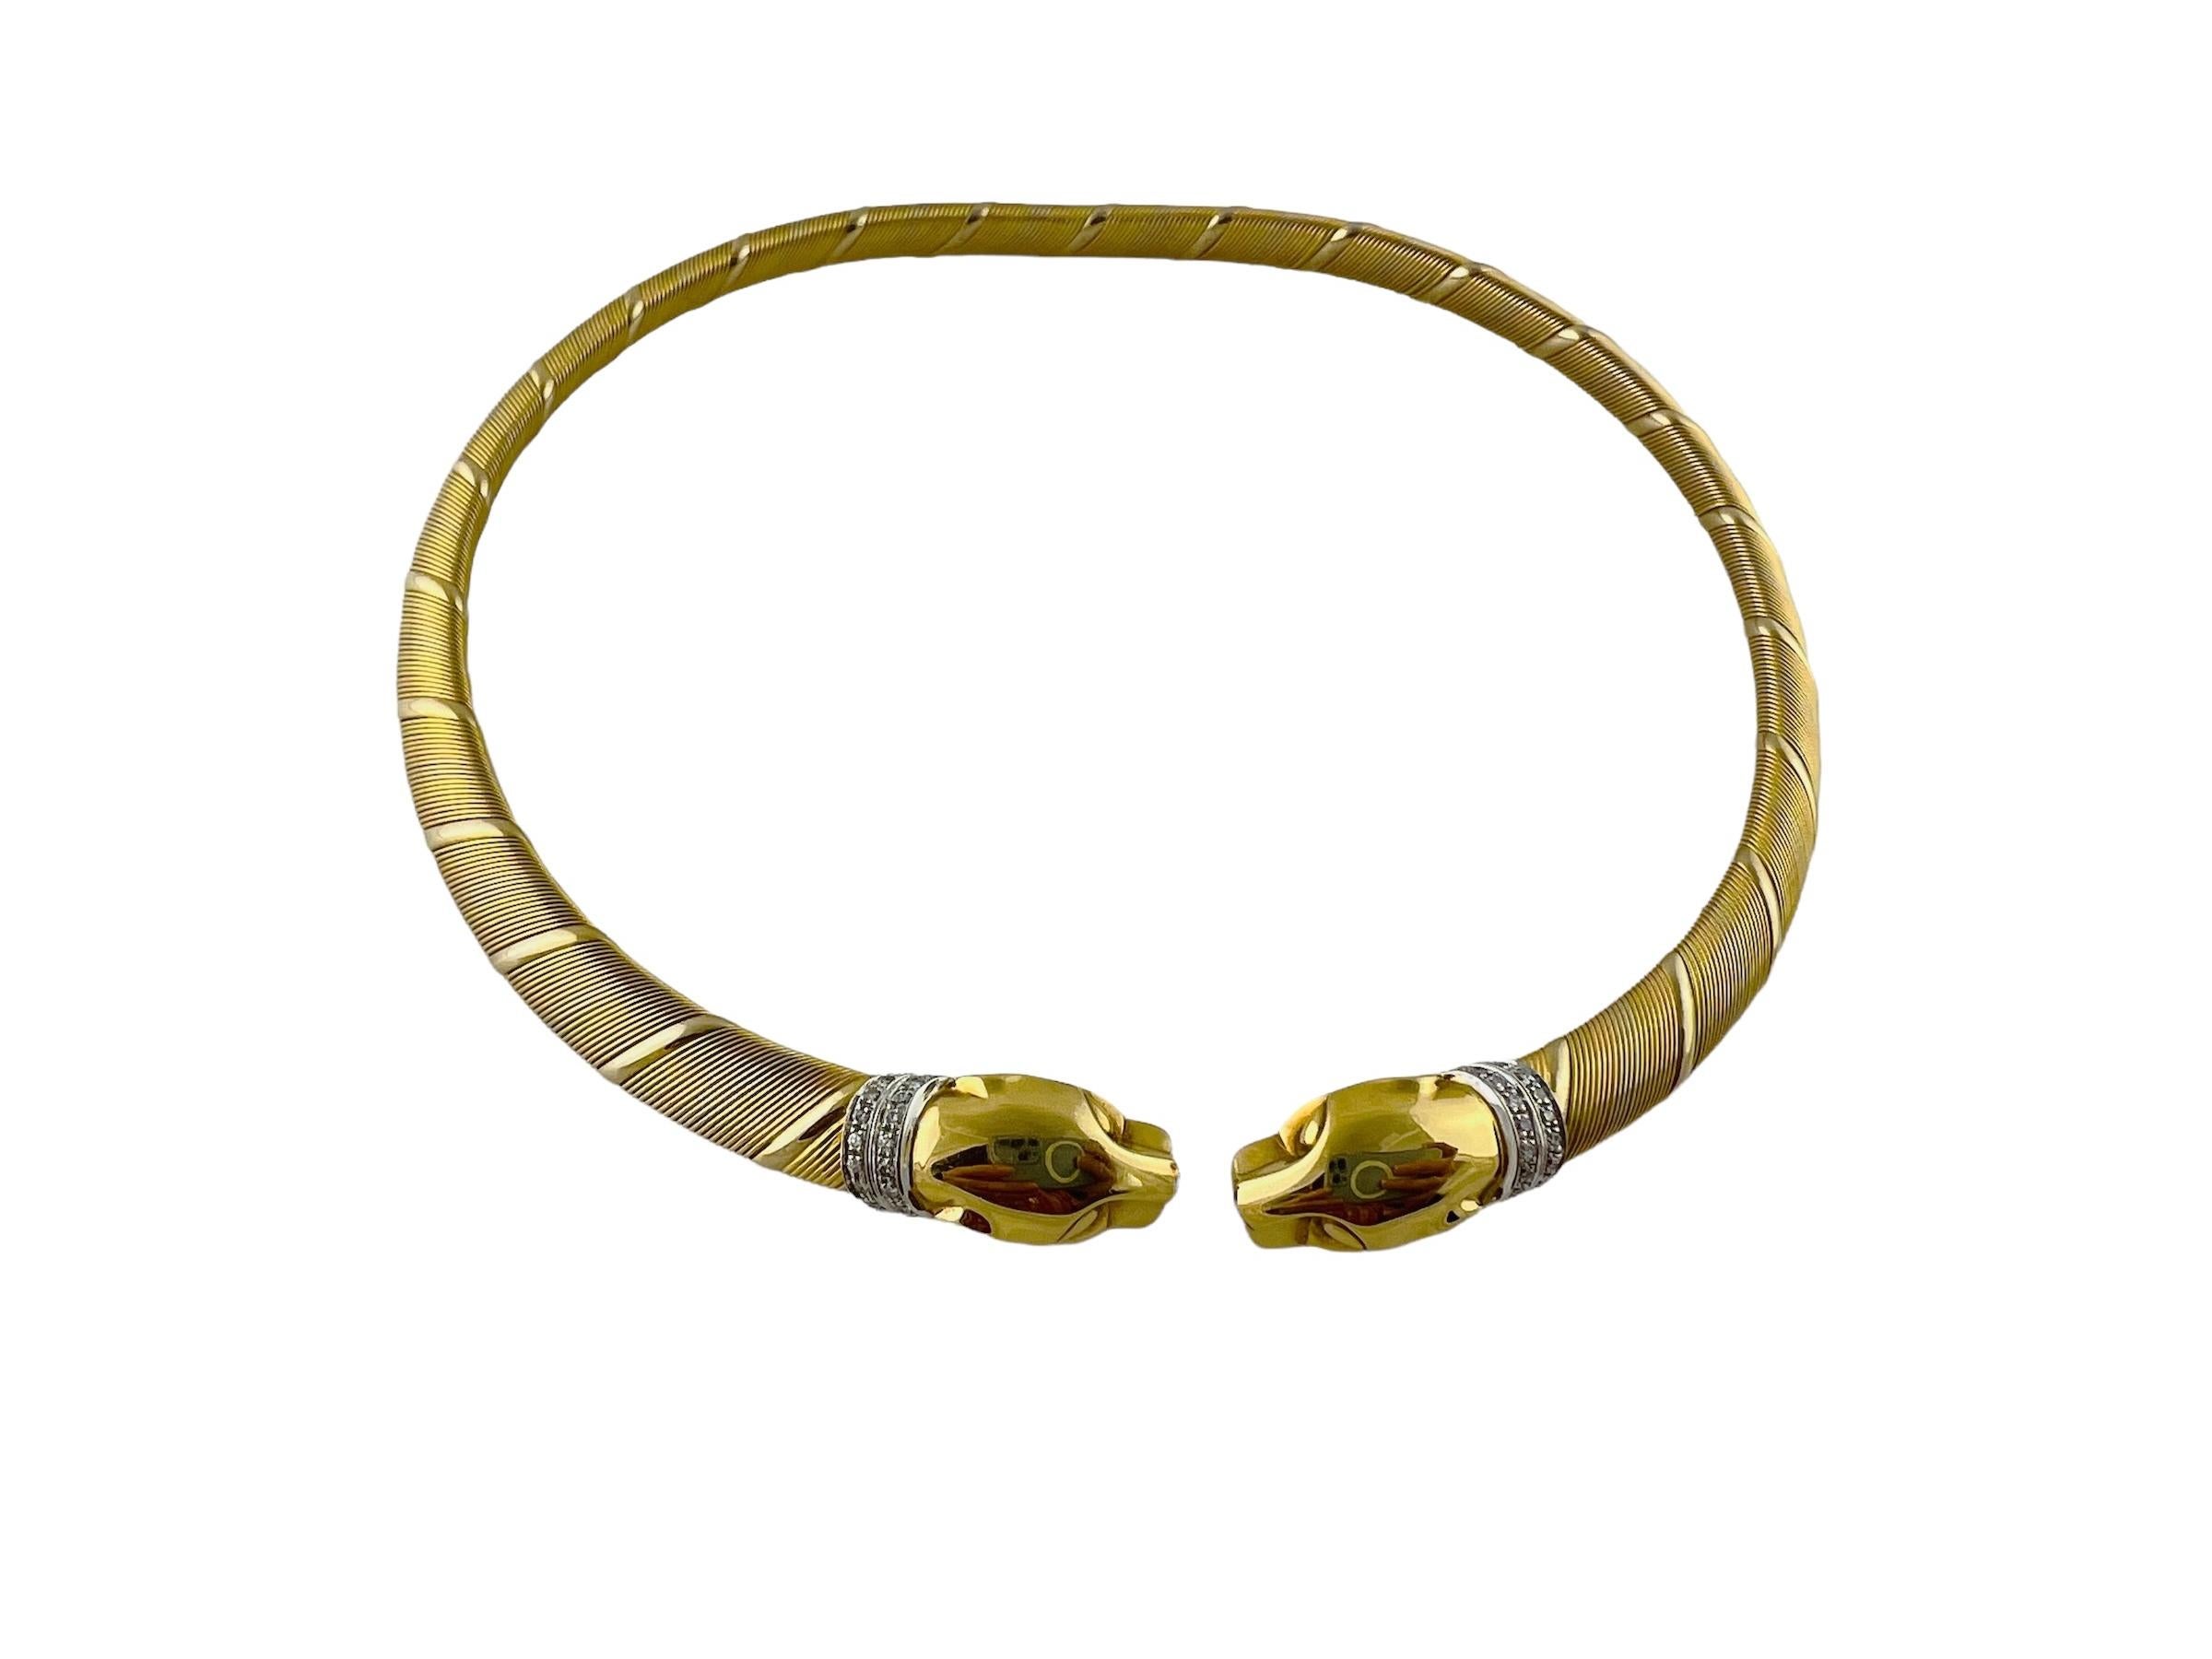 1996 Cartier 18K Tri Color Gold Diamond Panther Choker

This vintage Cartier choker from the Panthere collection is set in 18K yellow, white and rose gold

Cable design with tri color ribbons decorate necklace. At the ends are two panthers, each